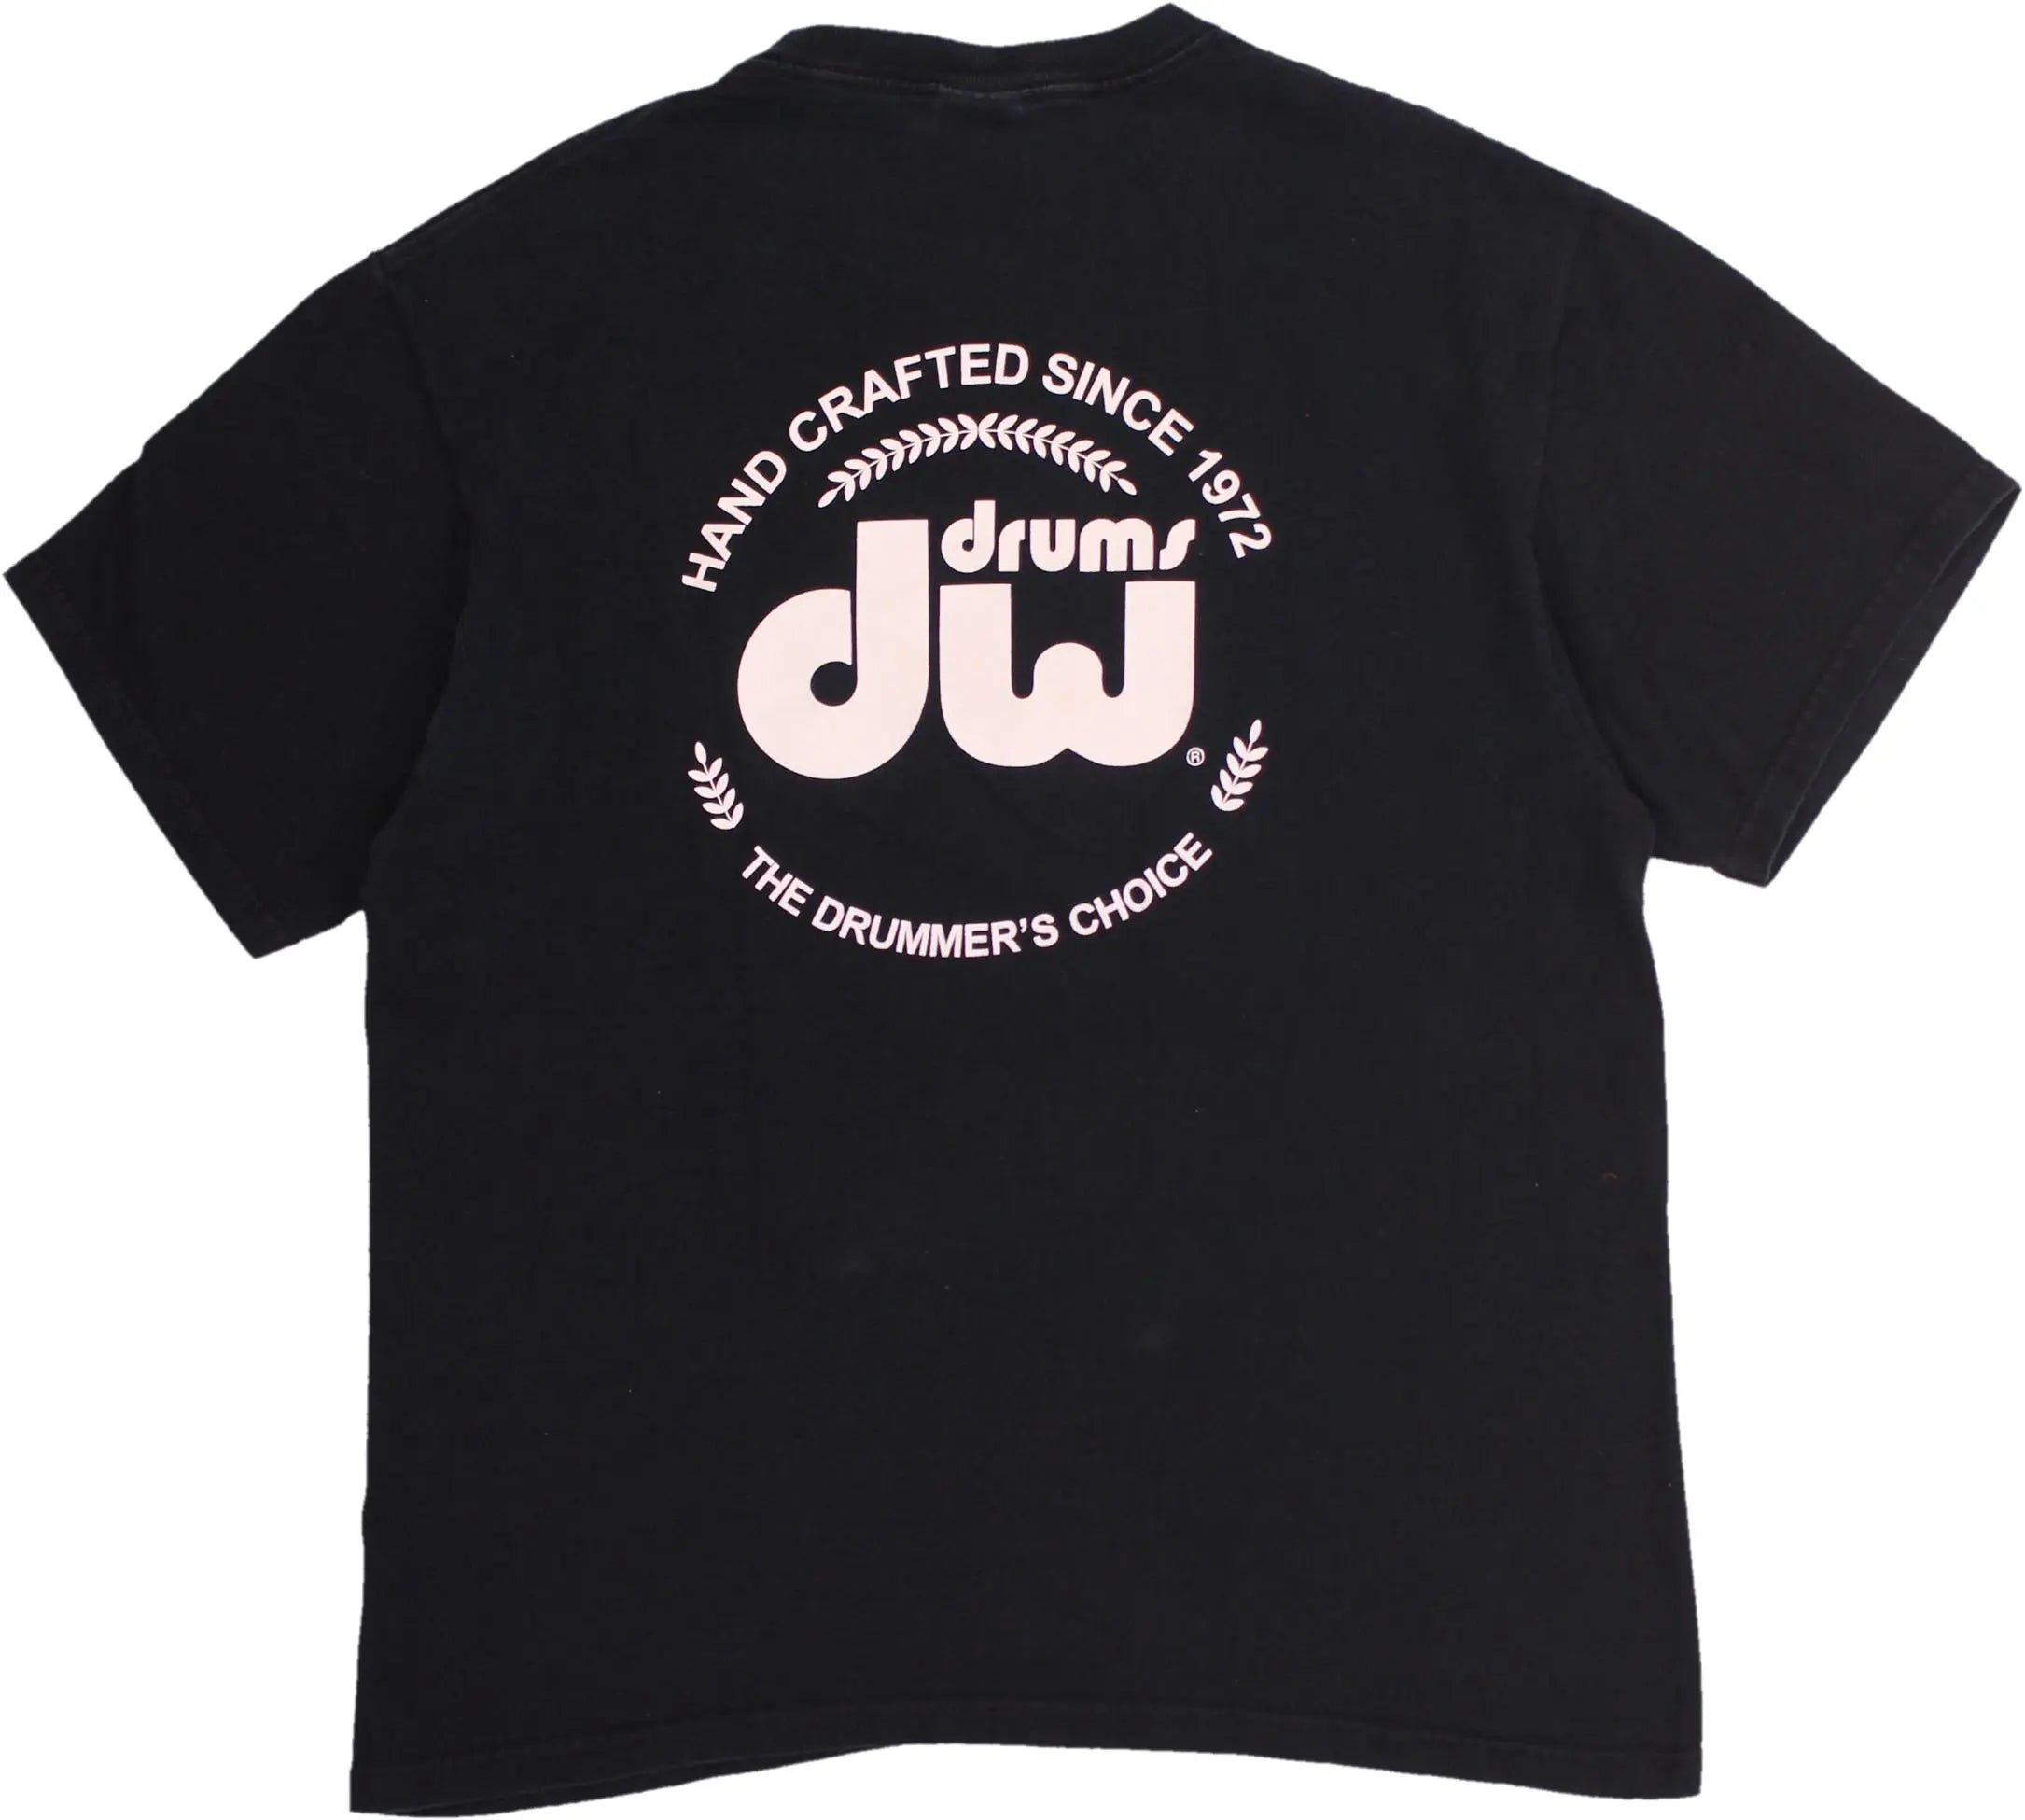 Fruit of the Loom - DW Drums T-shirt- ThriftTale.com - Vintage and second handclothing